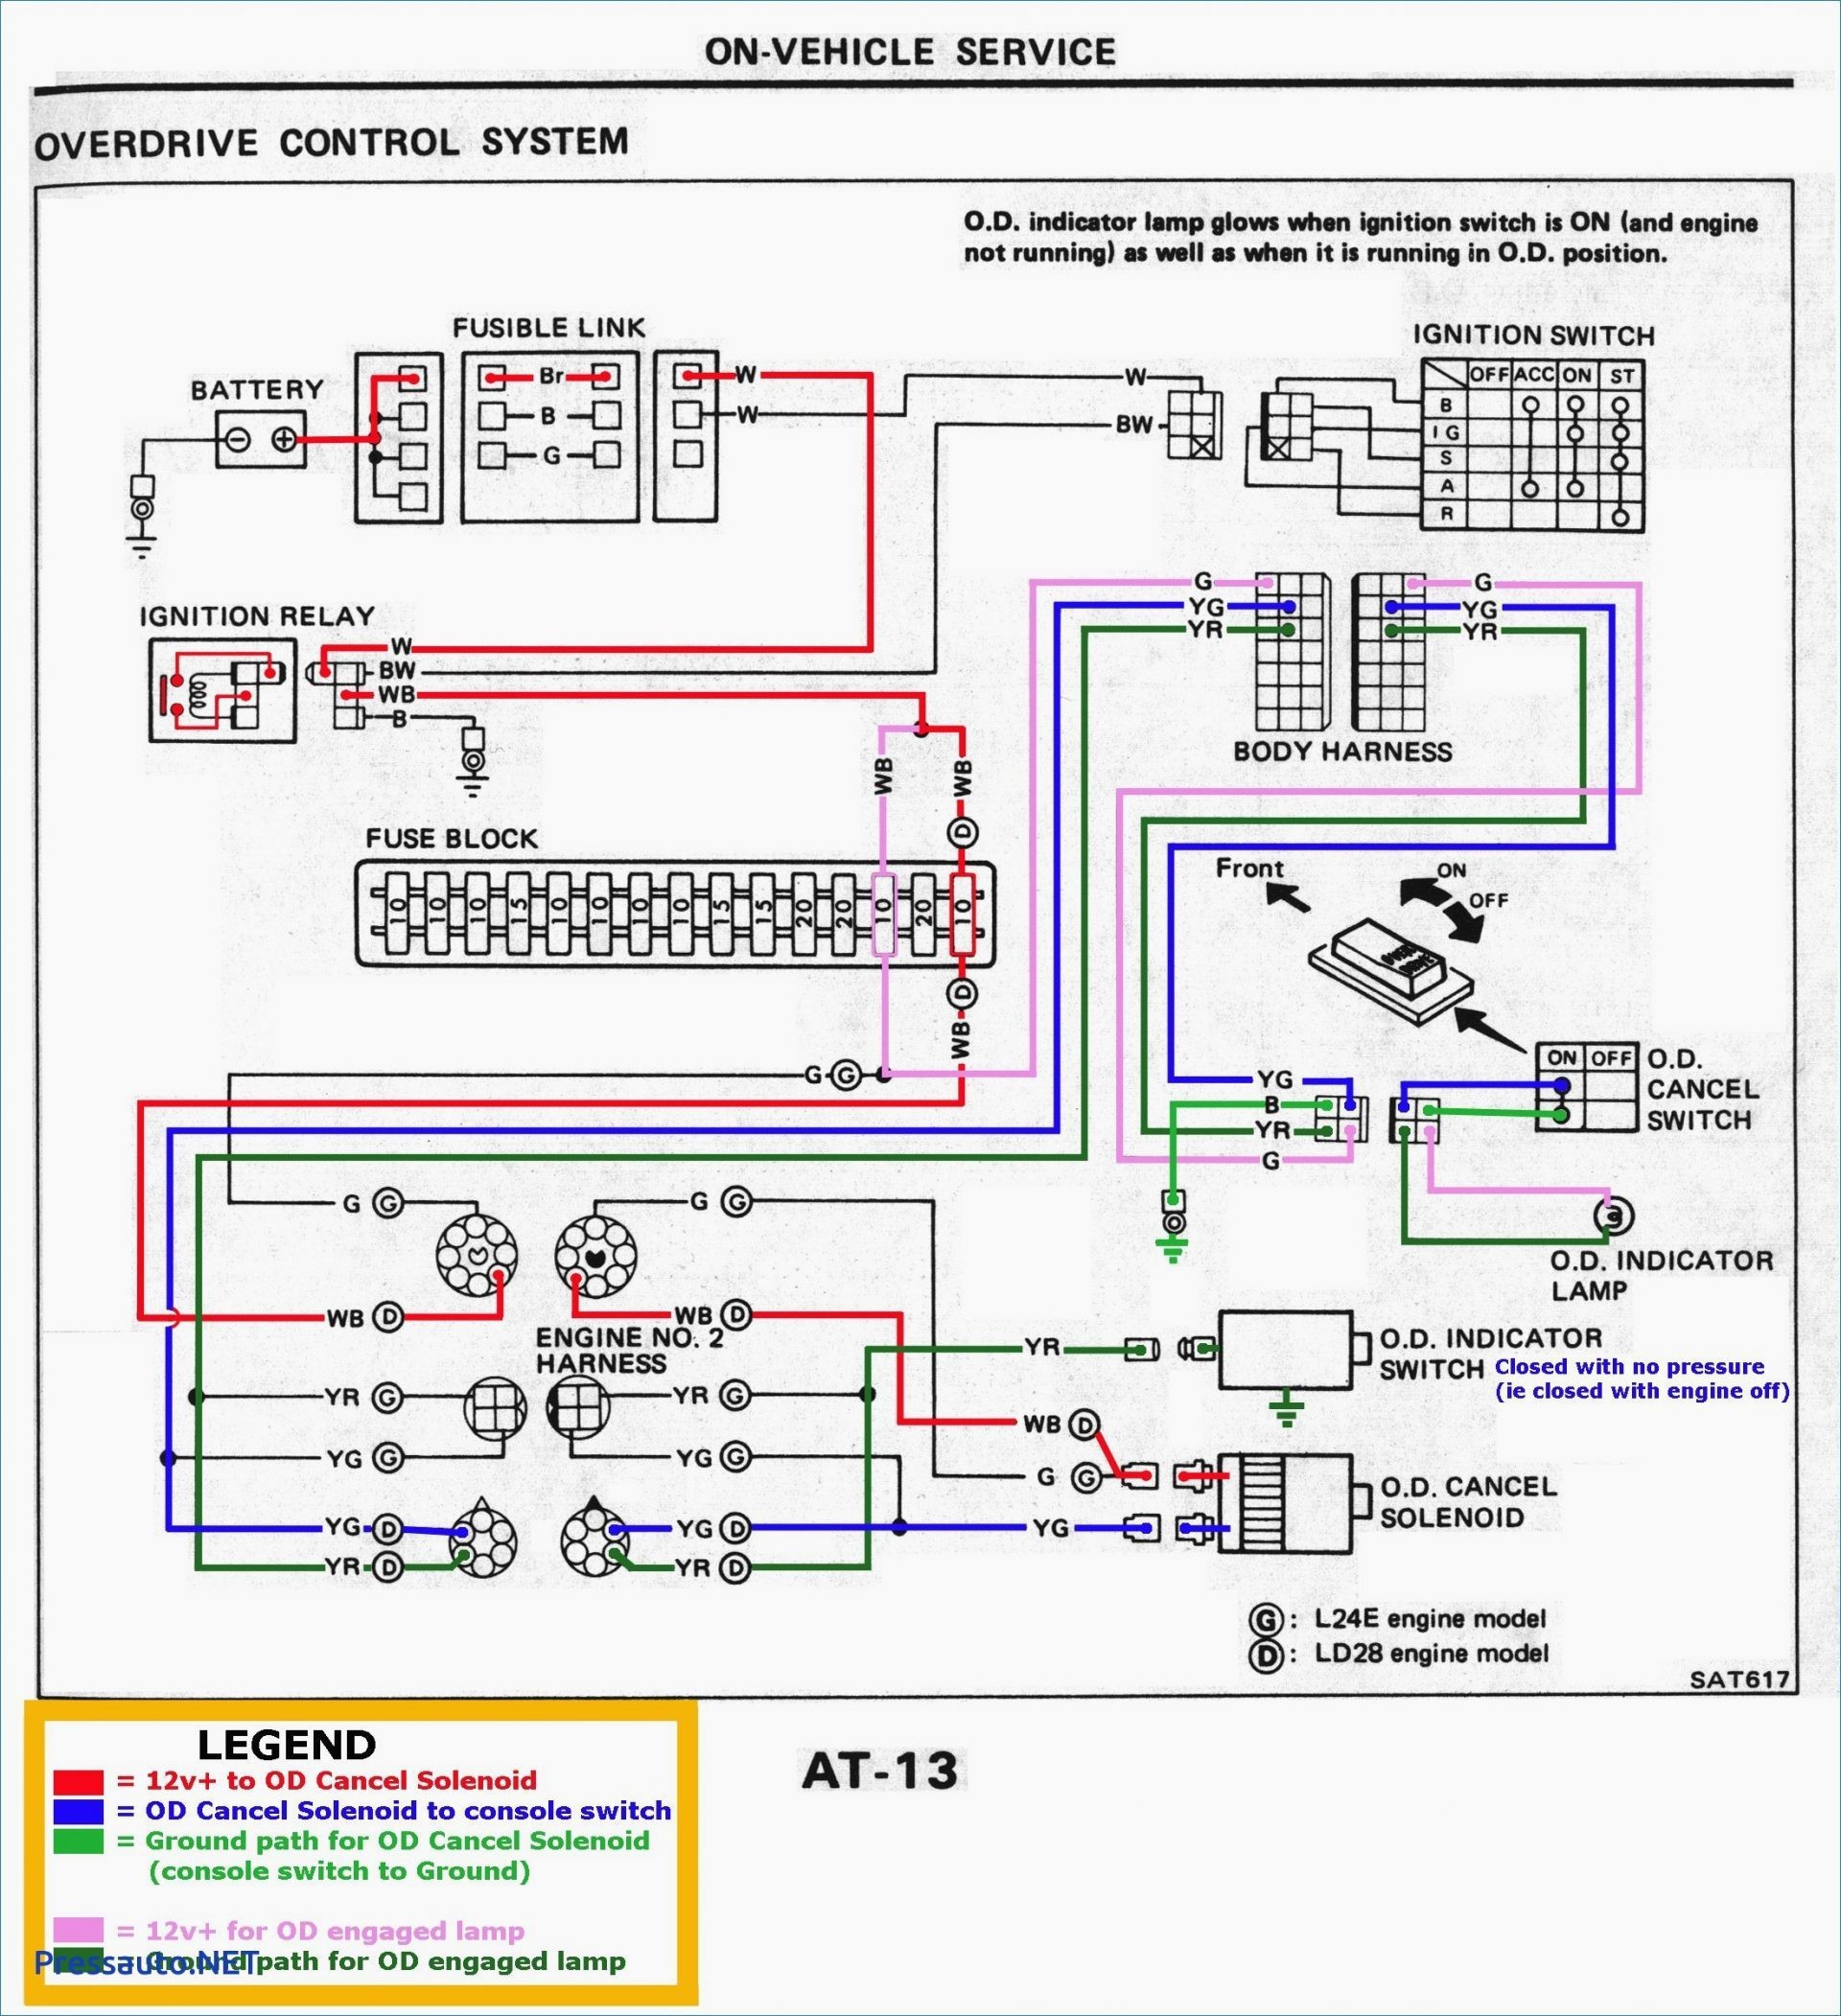 Wiring Diagram Led Driving Lights Refrence Wiring Diagram For Spotlights With A Relay New Led Tail Lights